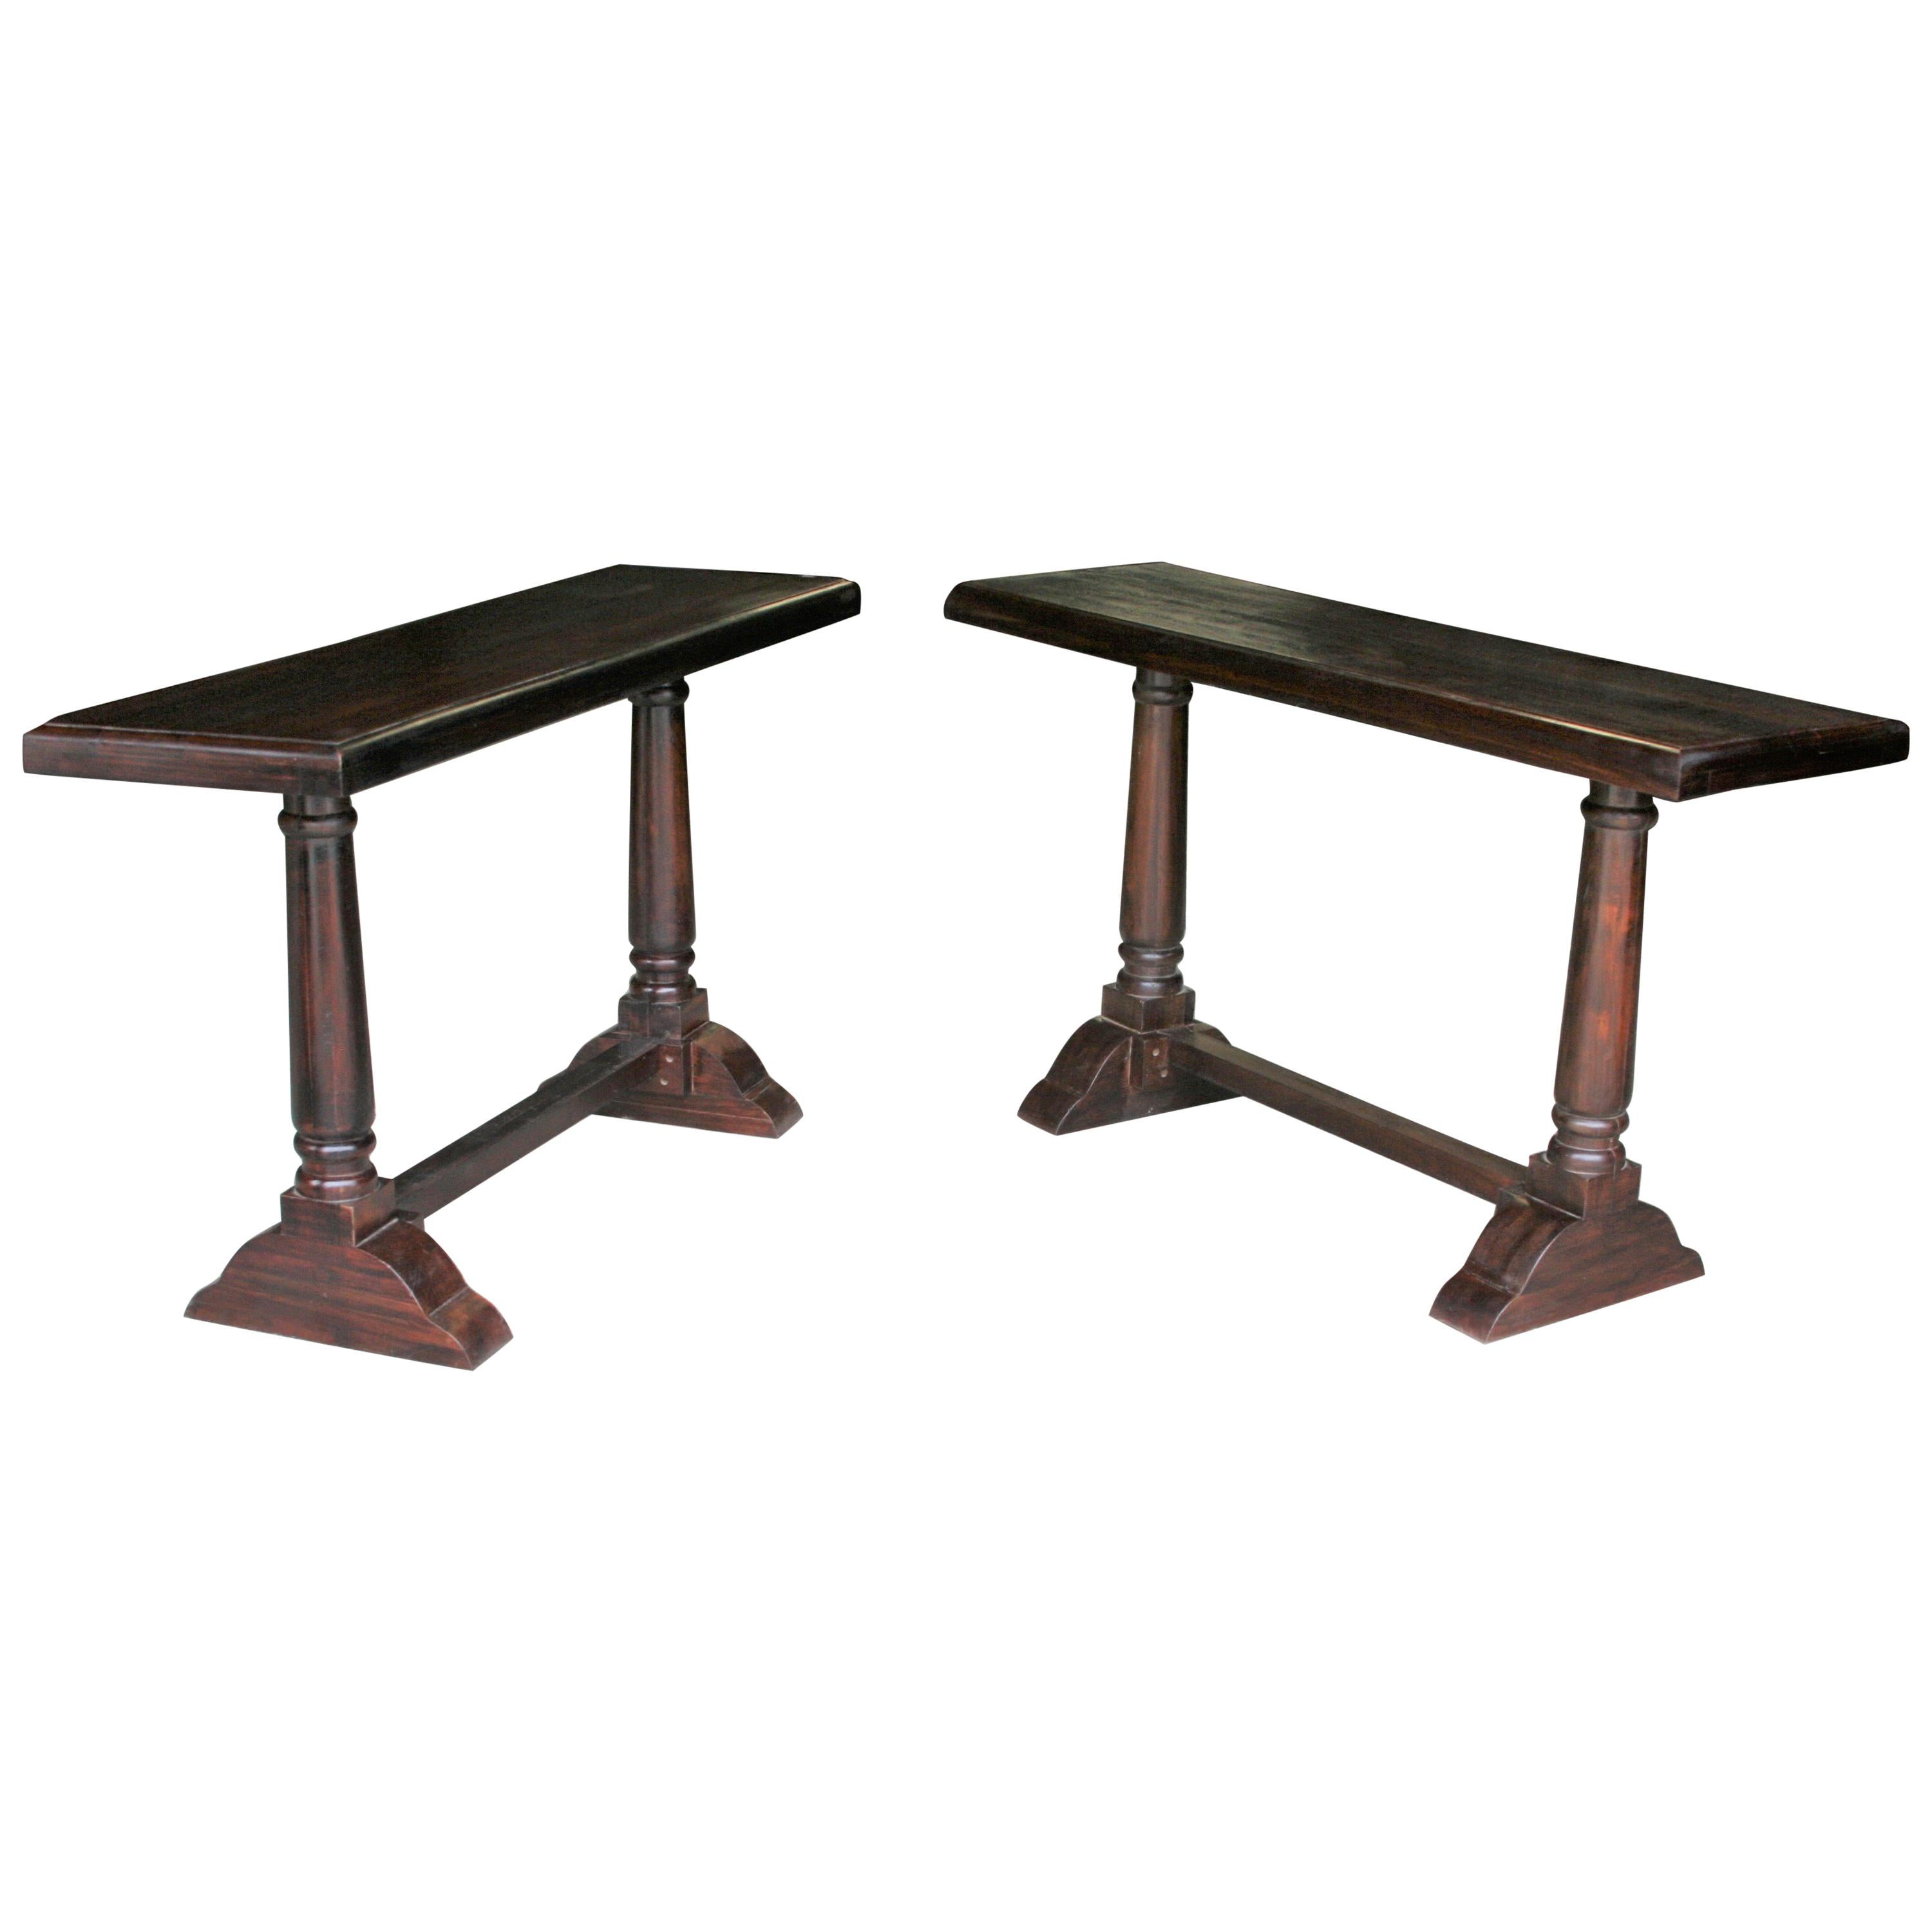 Pair of Mid-Century Modern Solid Teak Wood Console Tables from a Church For Sale